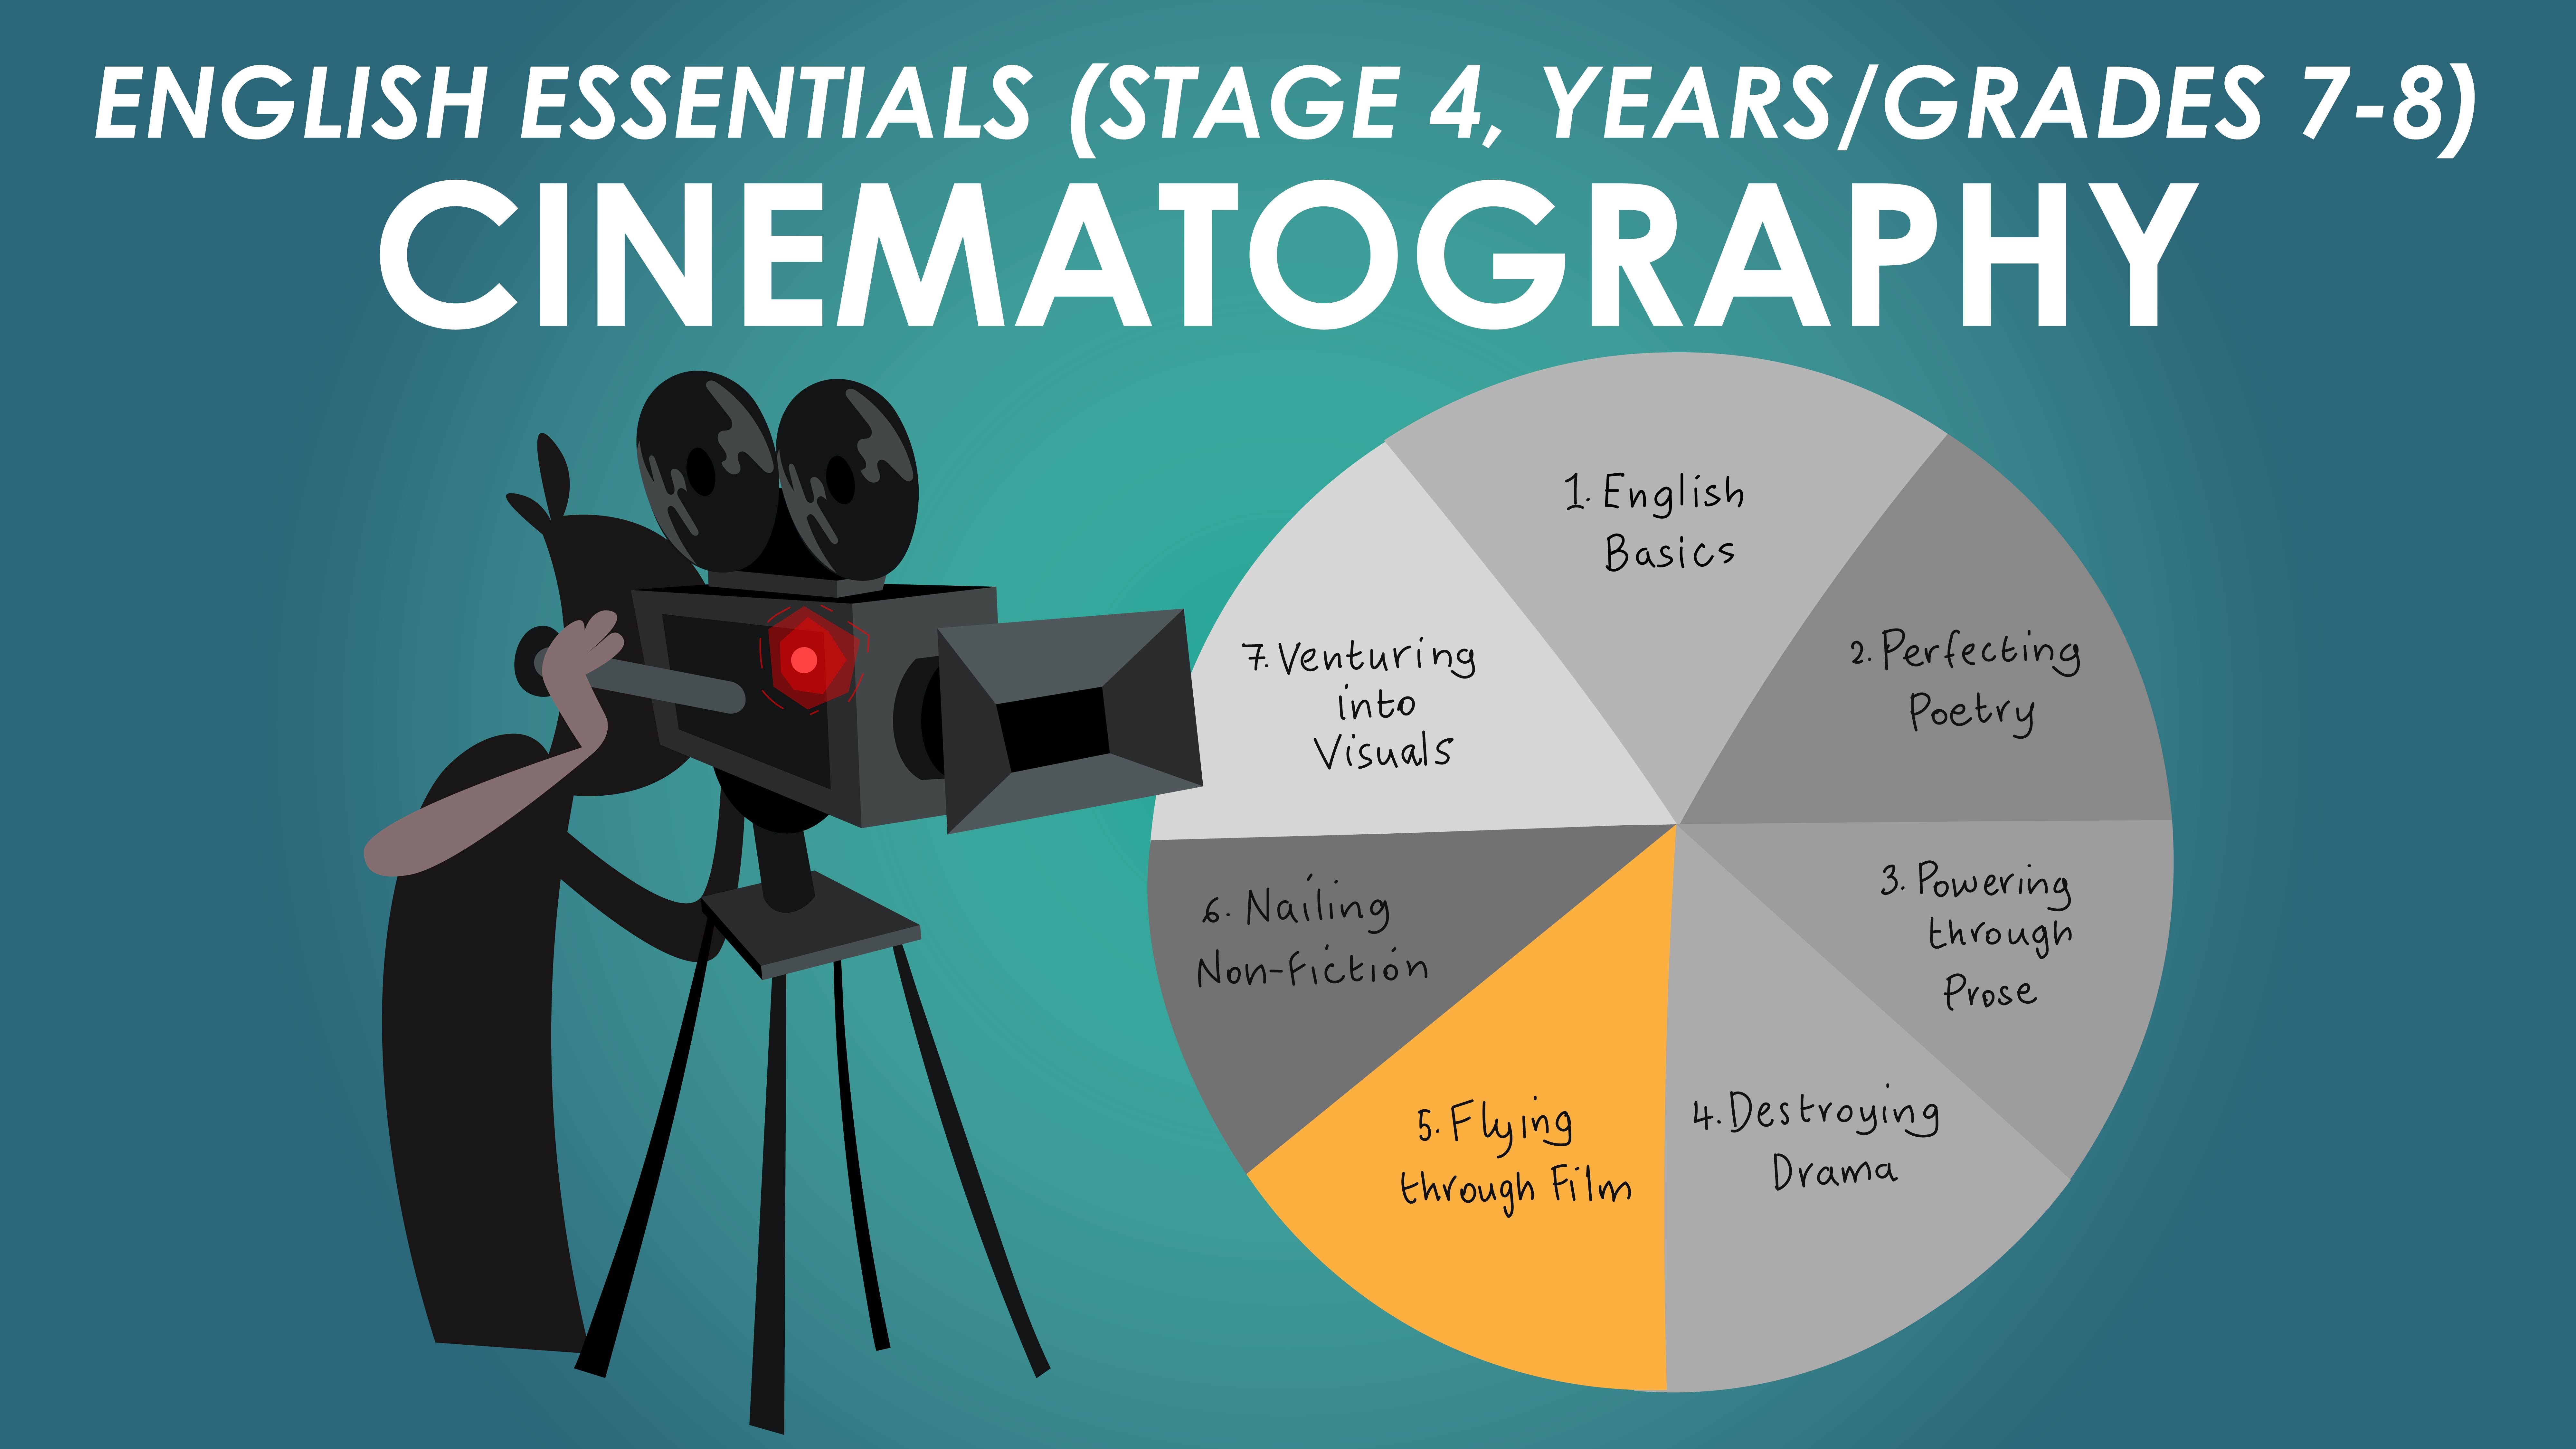 English Essentials - Flying Through Film - Cinematography (Stage 4, Years/Grades 7-8)